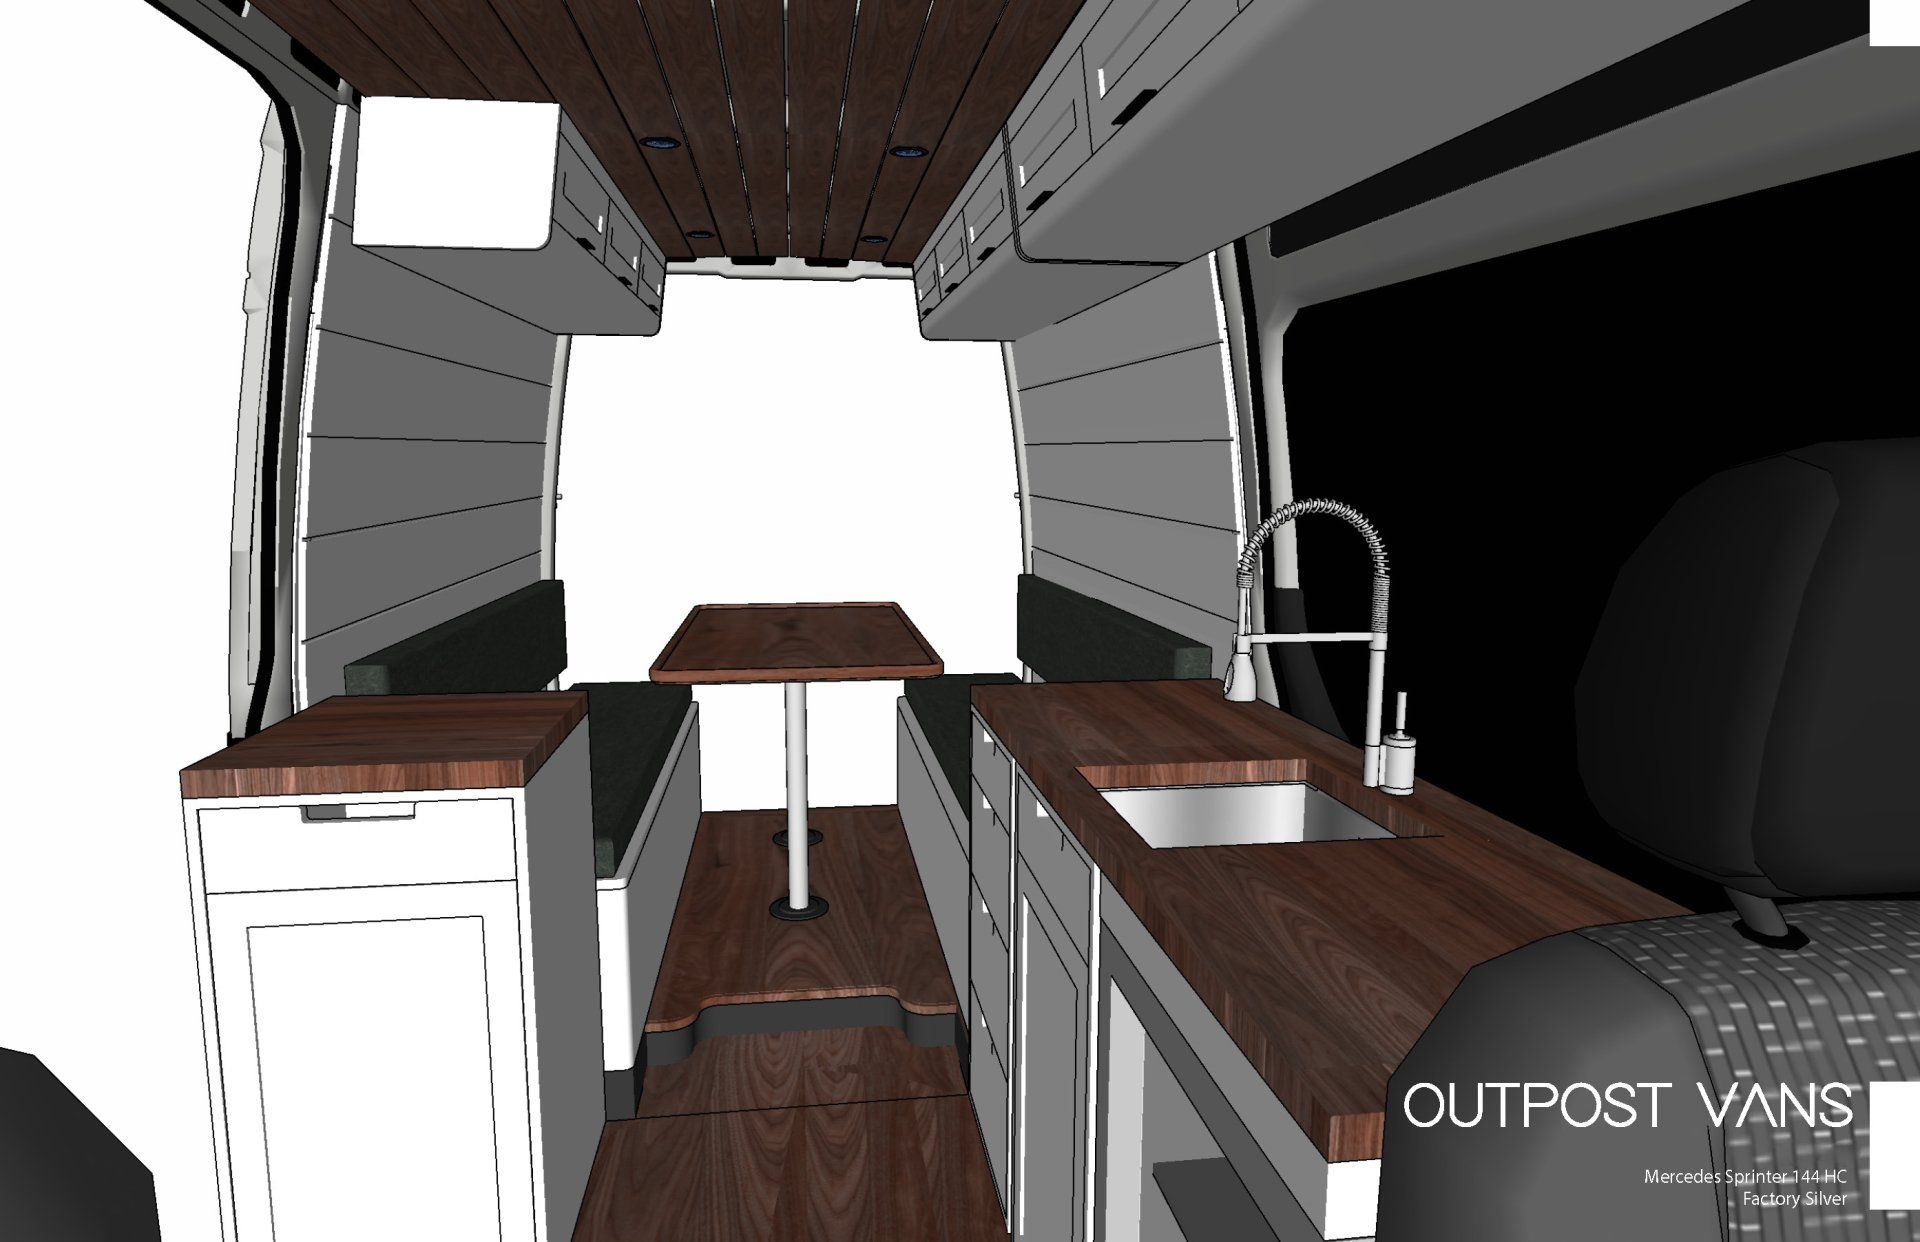 A 3d model of a van with wooden counter tops and a sink